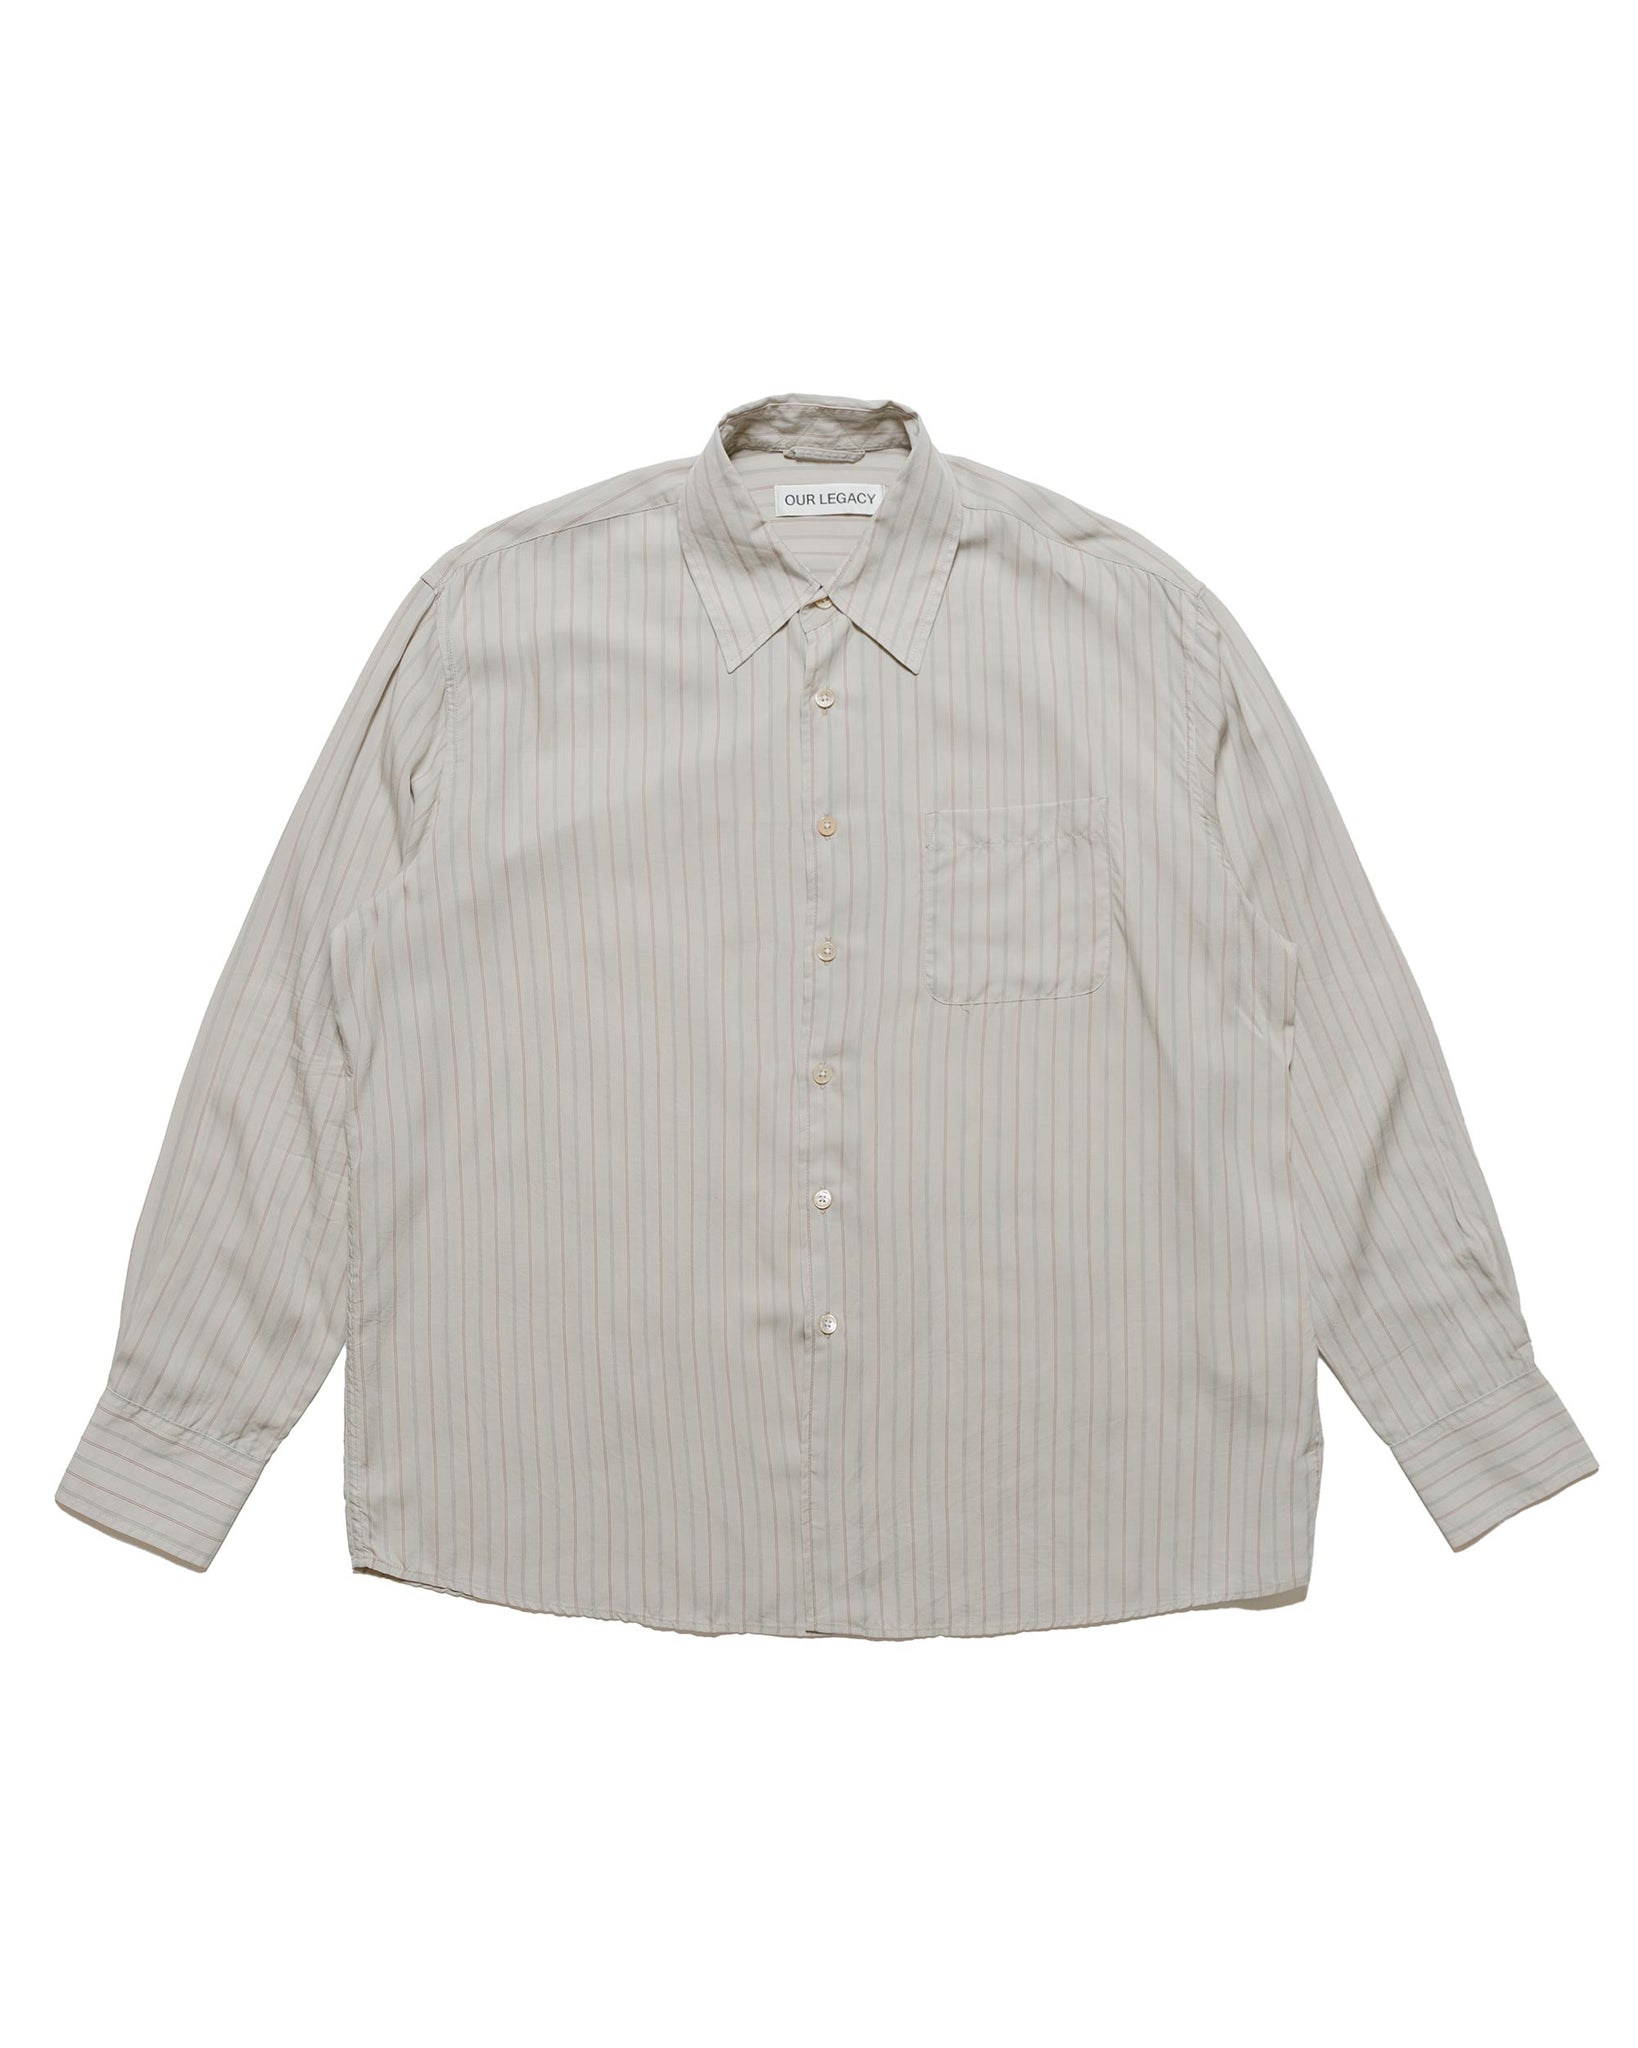 Our Legacy Above Shirt IT Support Floating Tencel